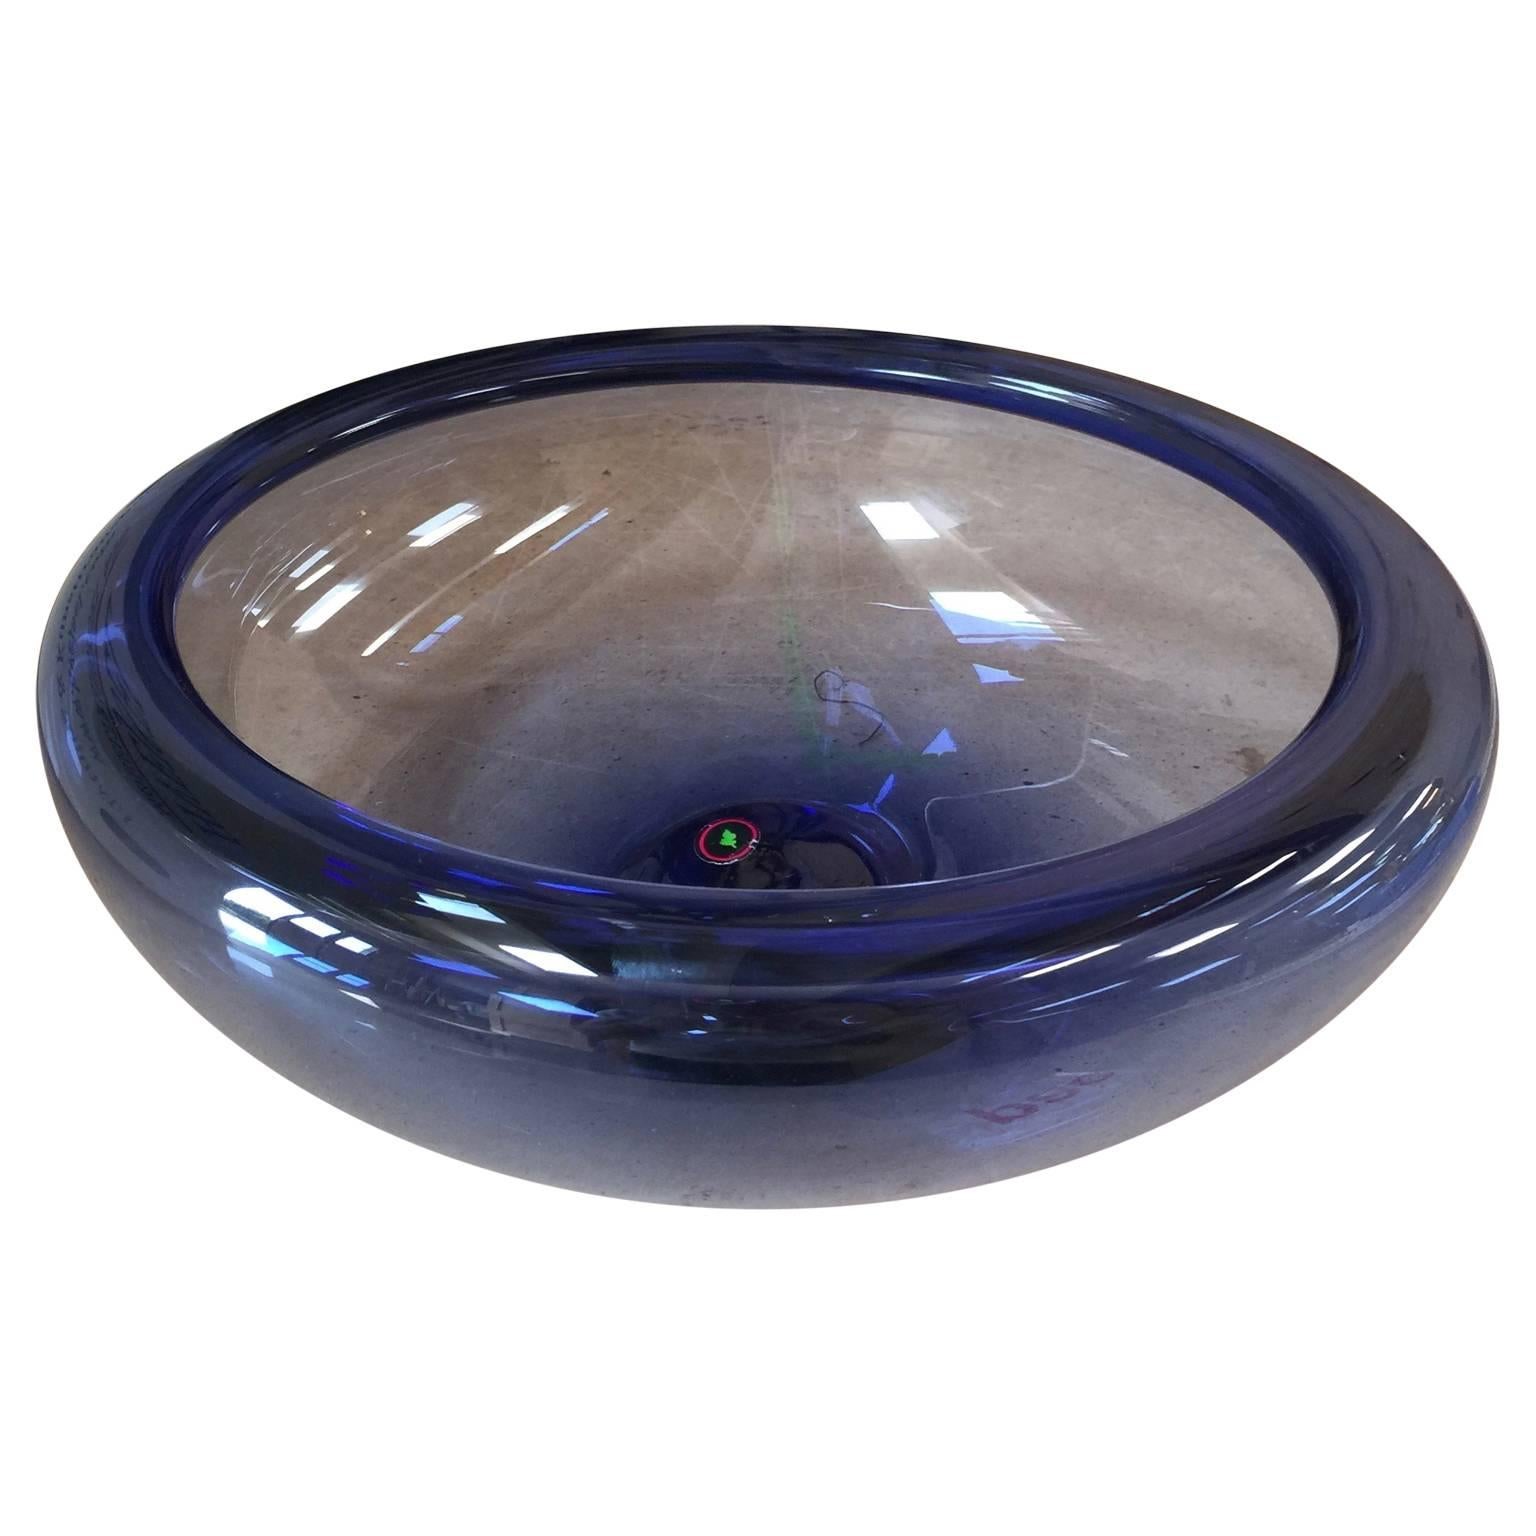 The Provence bowl was created by accident in 1956. Lutken was trying to create a glass cone, but somehow forgot to let the steam out of the molten glass. The result was flat like a plate and Lutken used it to create his classic bowl.
In the 1950s,